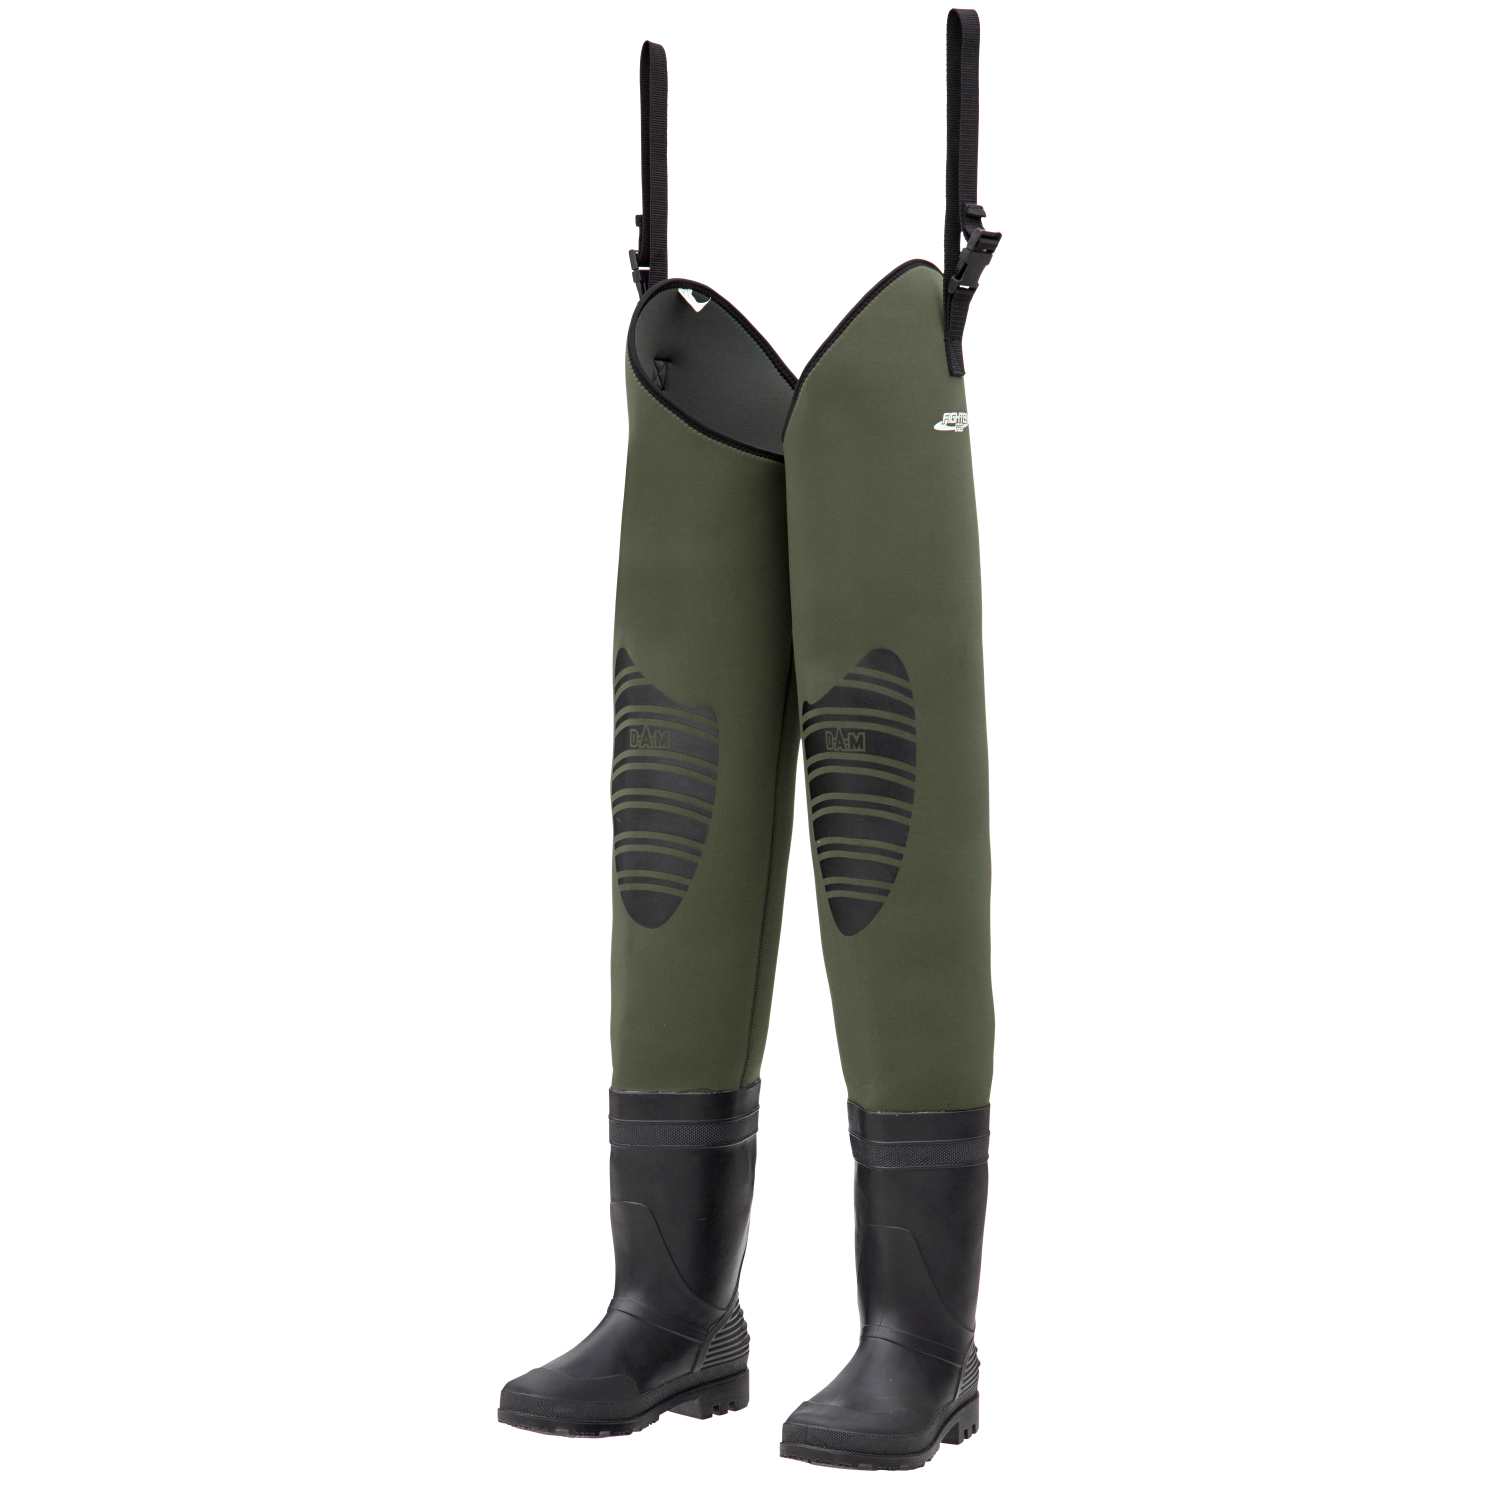 DAM Unisex DAM Fighter Pro Neoprene Hip Waders with Rubber Sole 